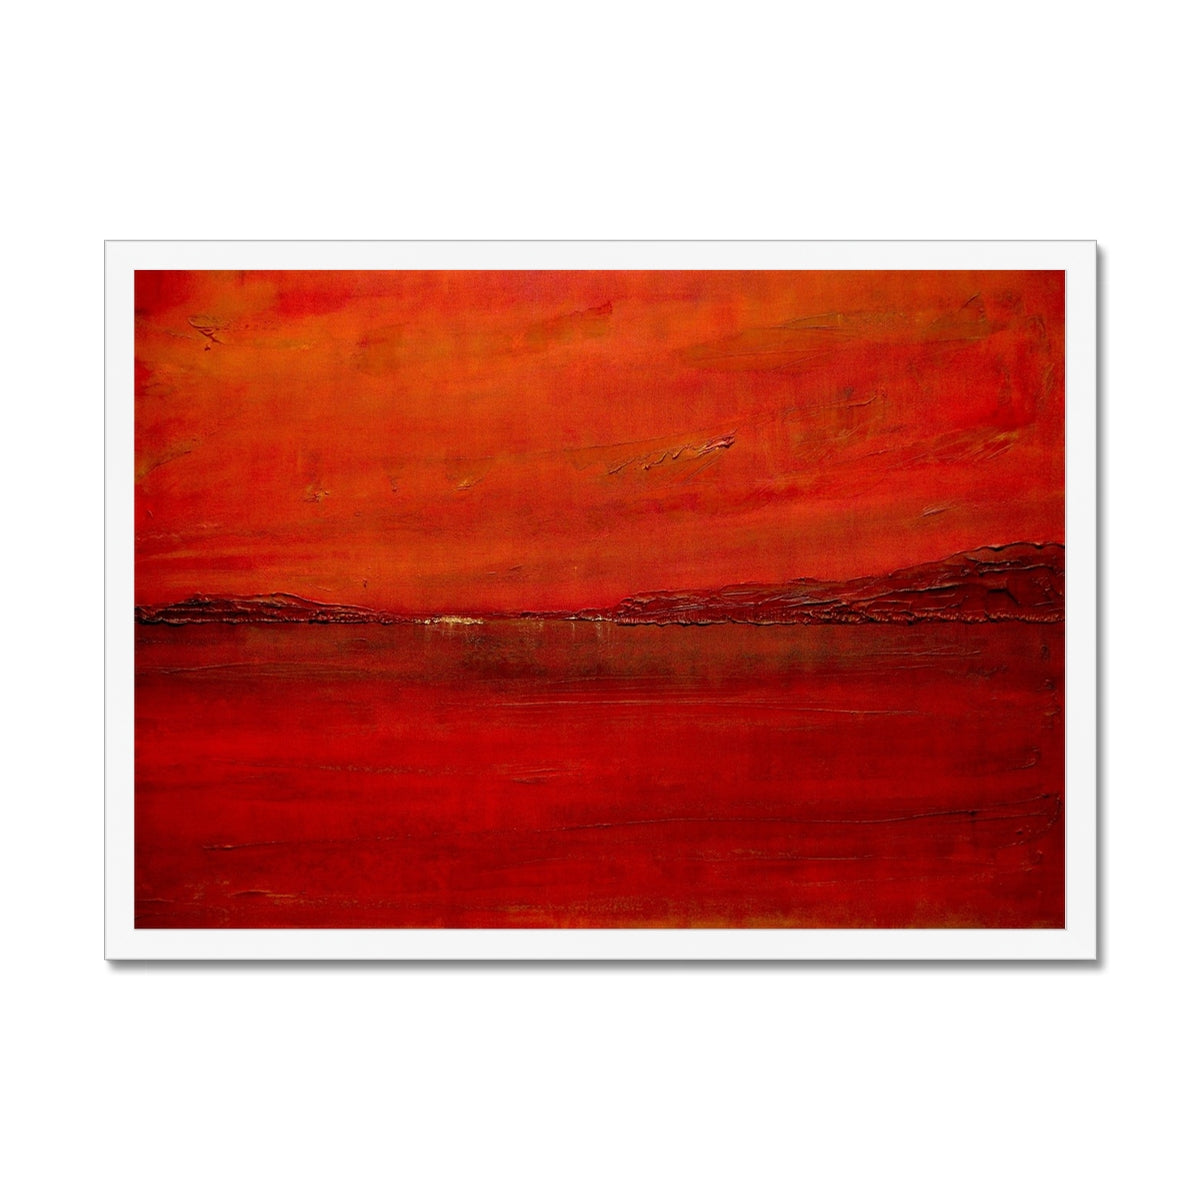 Deep Loch Lomond Sunset Painting | Framed Prints From Scotland-Framed Prints-Scottish Lochs & Mountains Art Gallery-A2 Landscape-White Frame-Paintings, Prints, Homeware, Art Gifts From Scotland By Scottish Artist Kevin Hunter